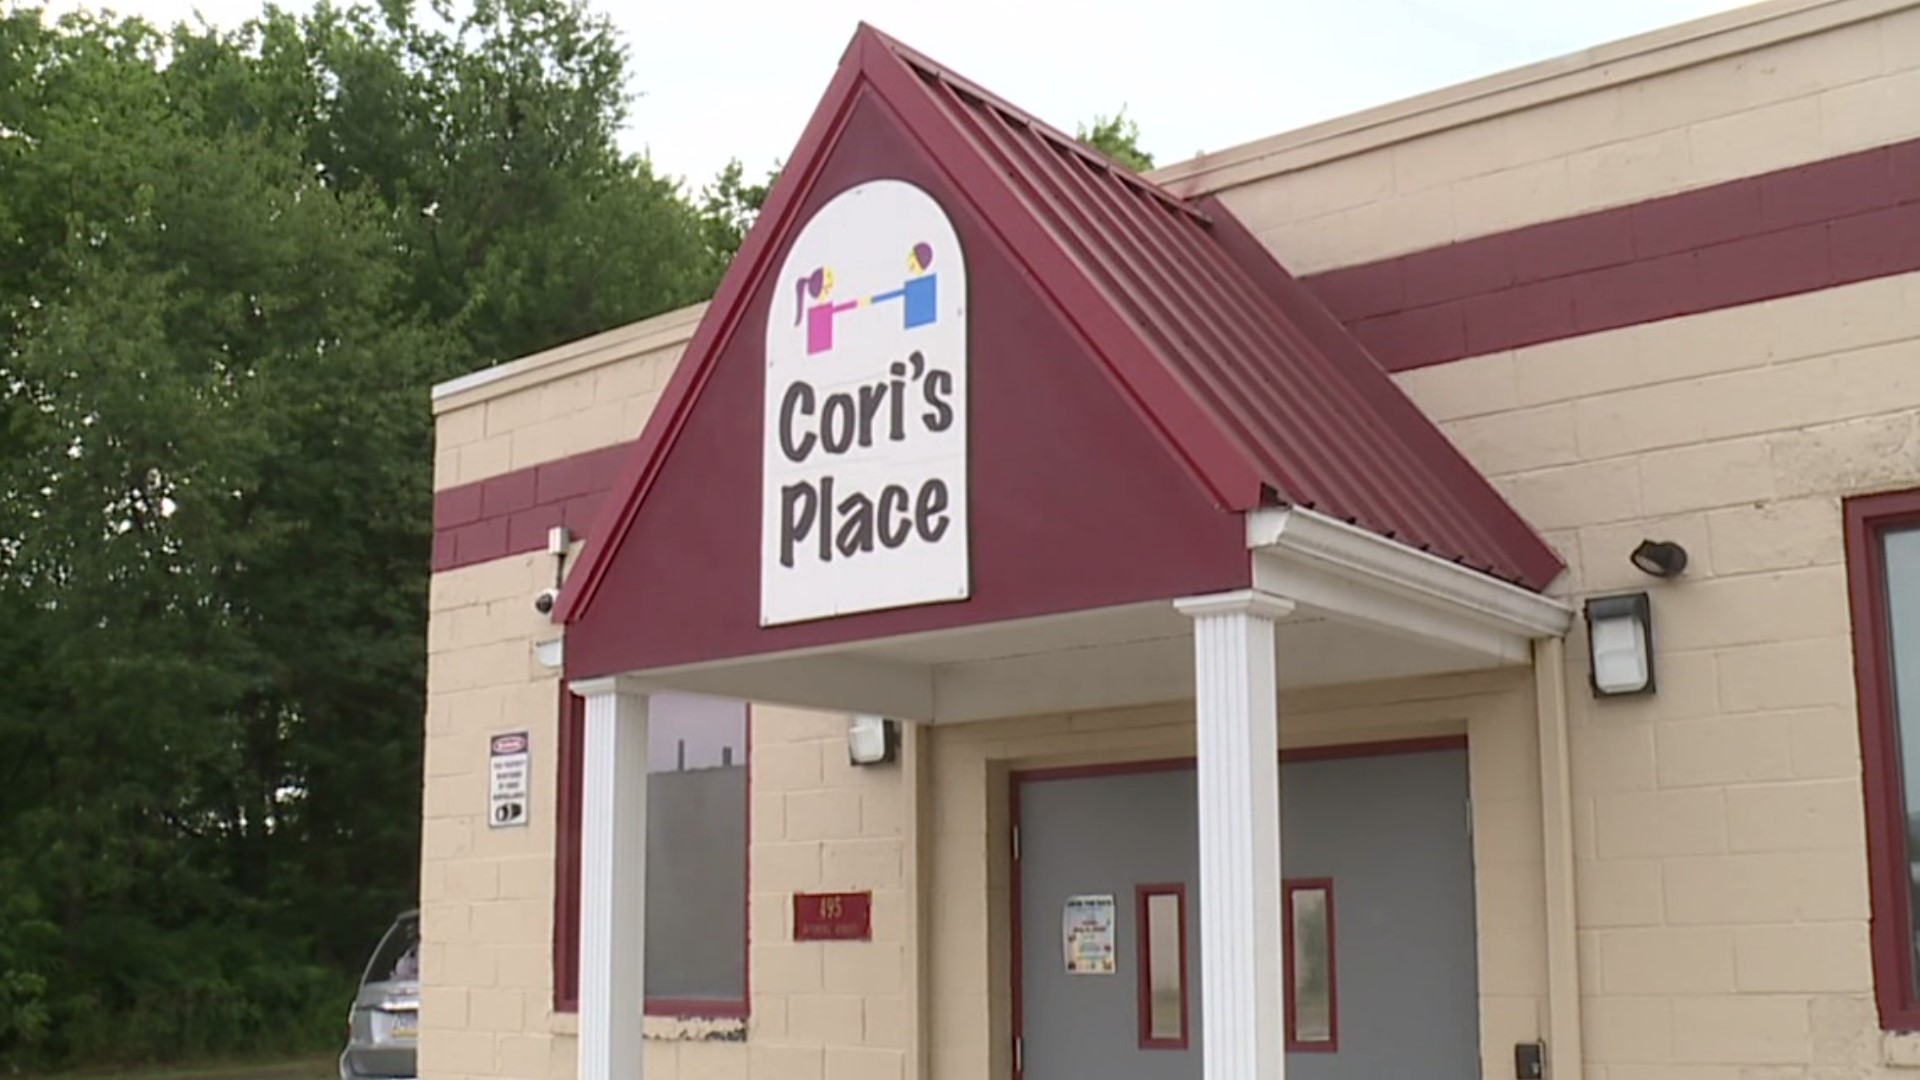 A Luzerne County nonprofit is celebrating two decades of serving those with intellectual disabilities. Newswatch 16's Emily Kress shares the mission of Cori's Place.